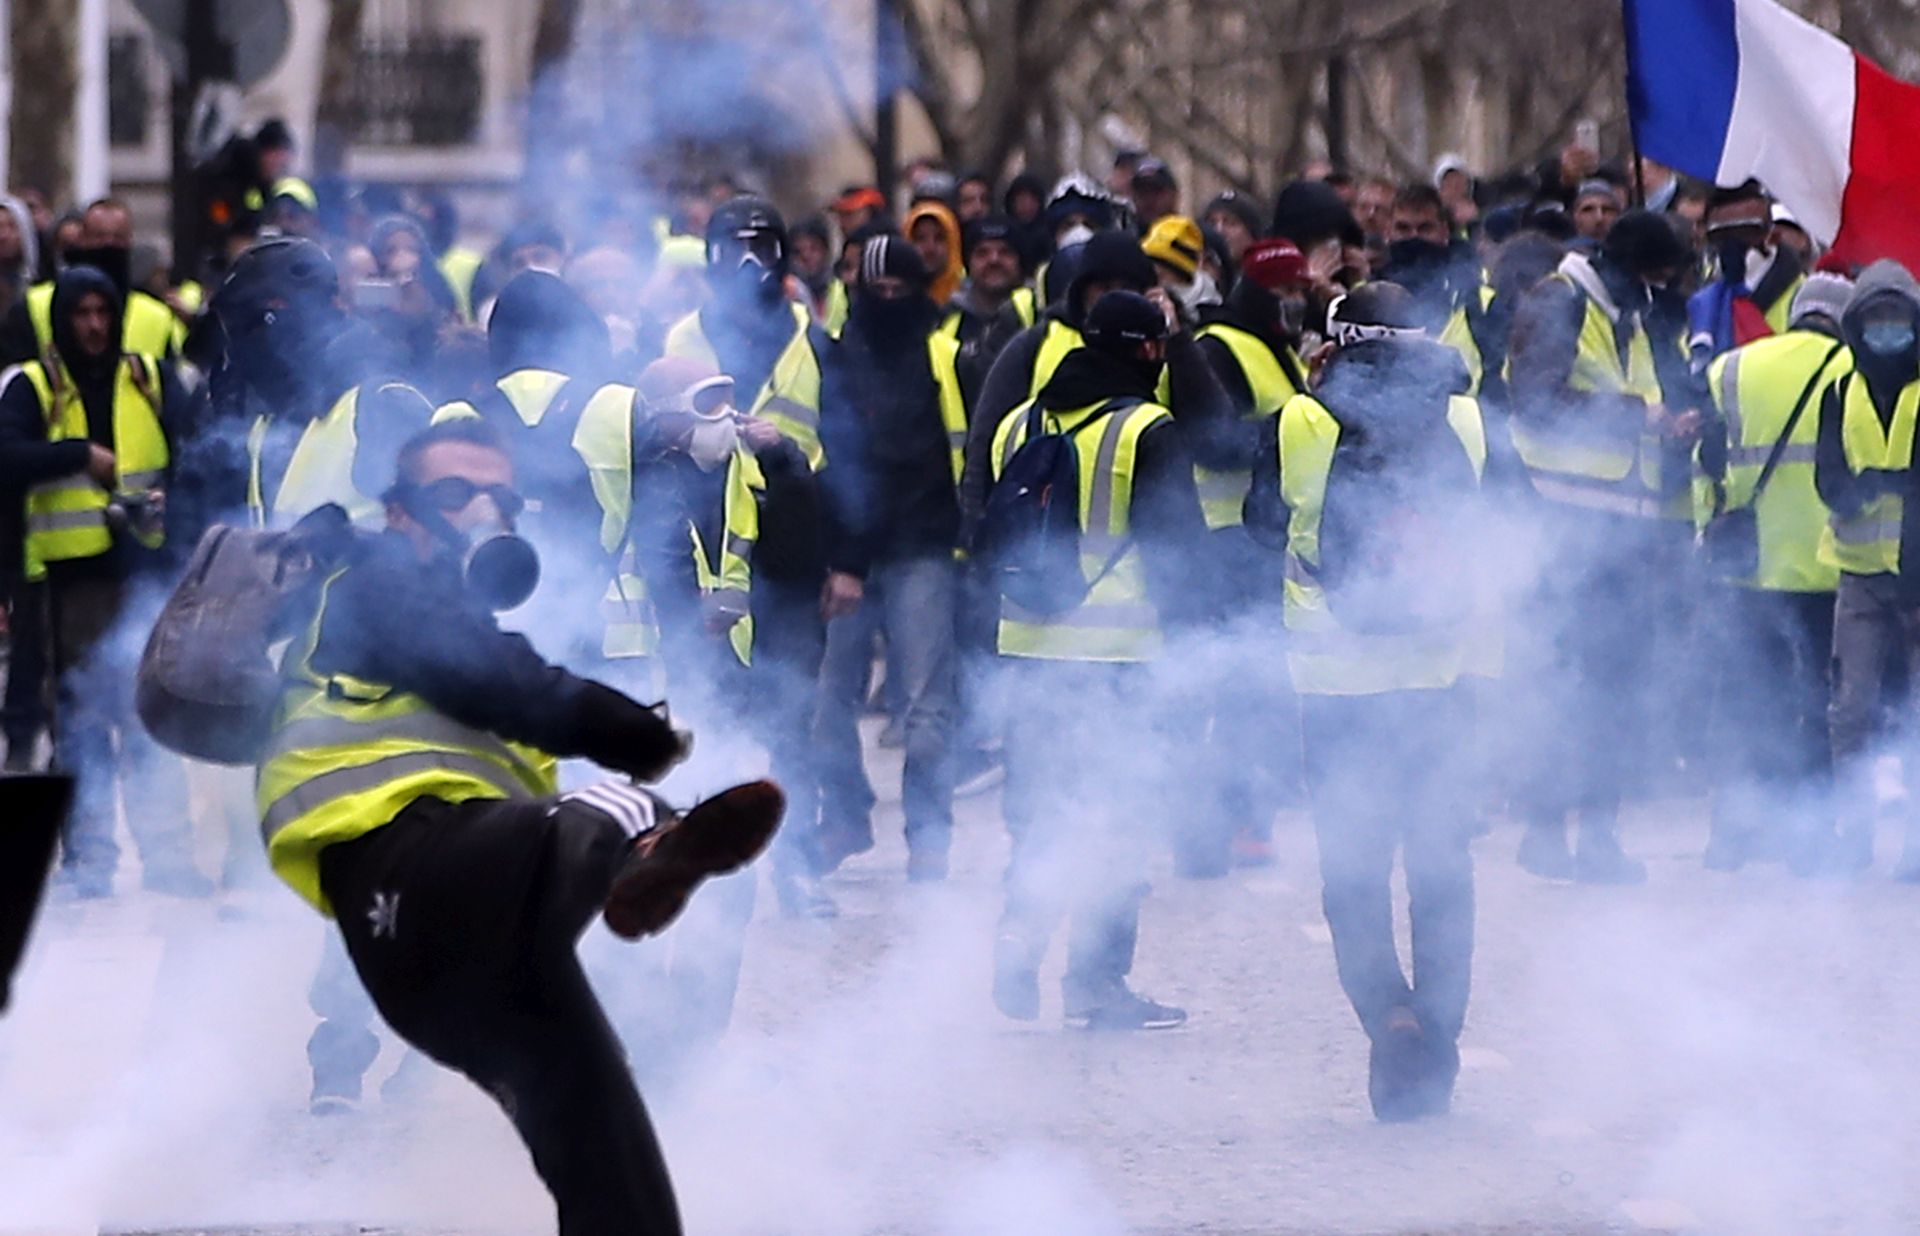 epa07216572 A Yellow Vests protester hurl back tear gas to French riot police during a demonstration in Paris, France, 08 December 2018. Police in Paris is preparing for another weekend of protests of the so-called 'gilets jaunes' (yellow vests) protest movement. Recent demonstrations of the movement, which reportedly has no political affiliation, had turned violent and caused authorities to close some landmark sites in Paris this weekend.  EPA/IAN LANGSDON